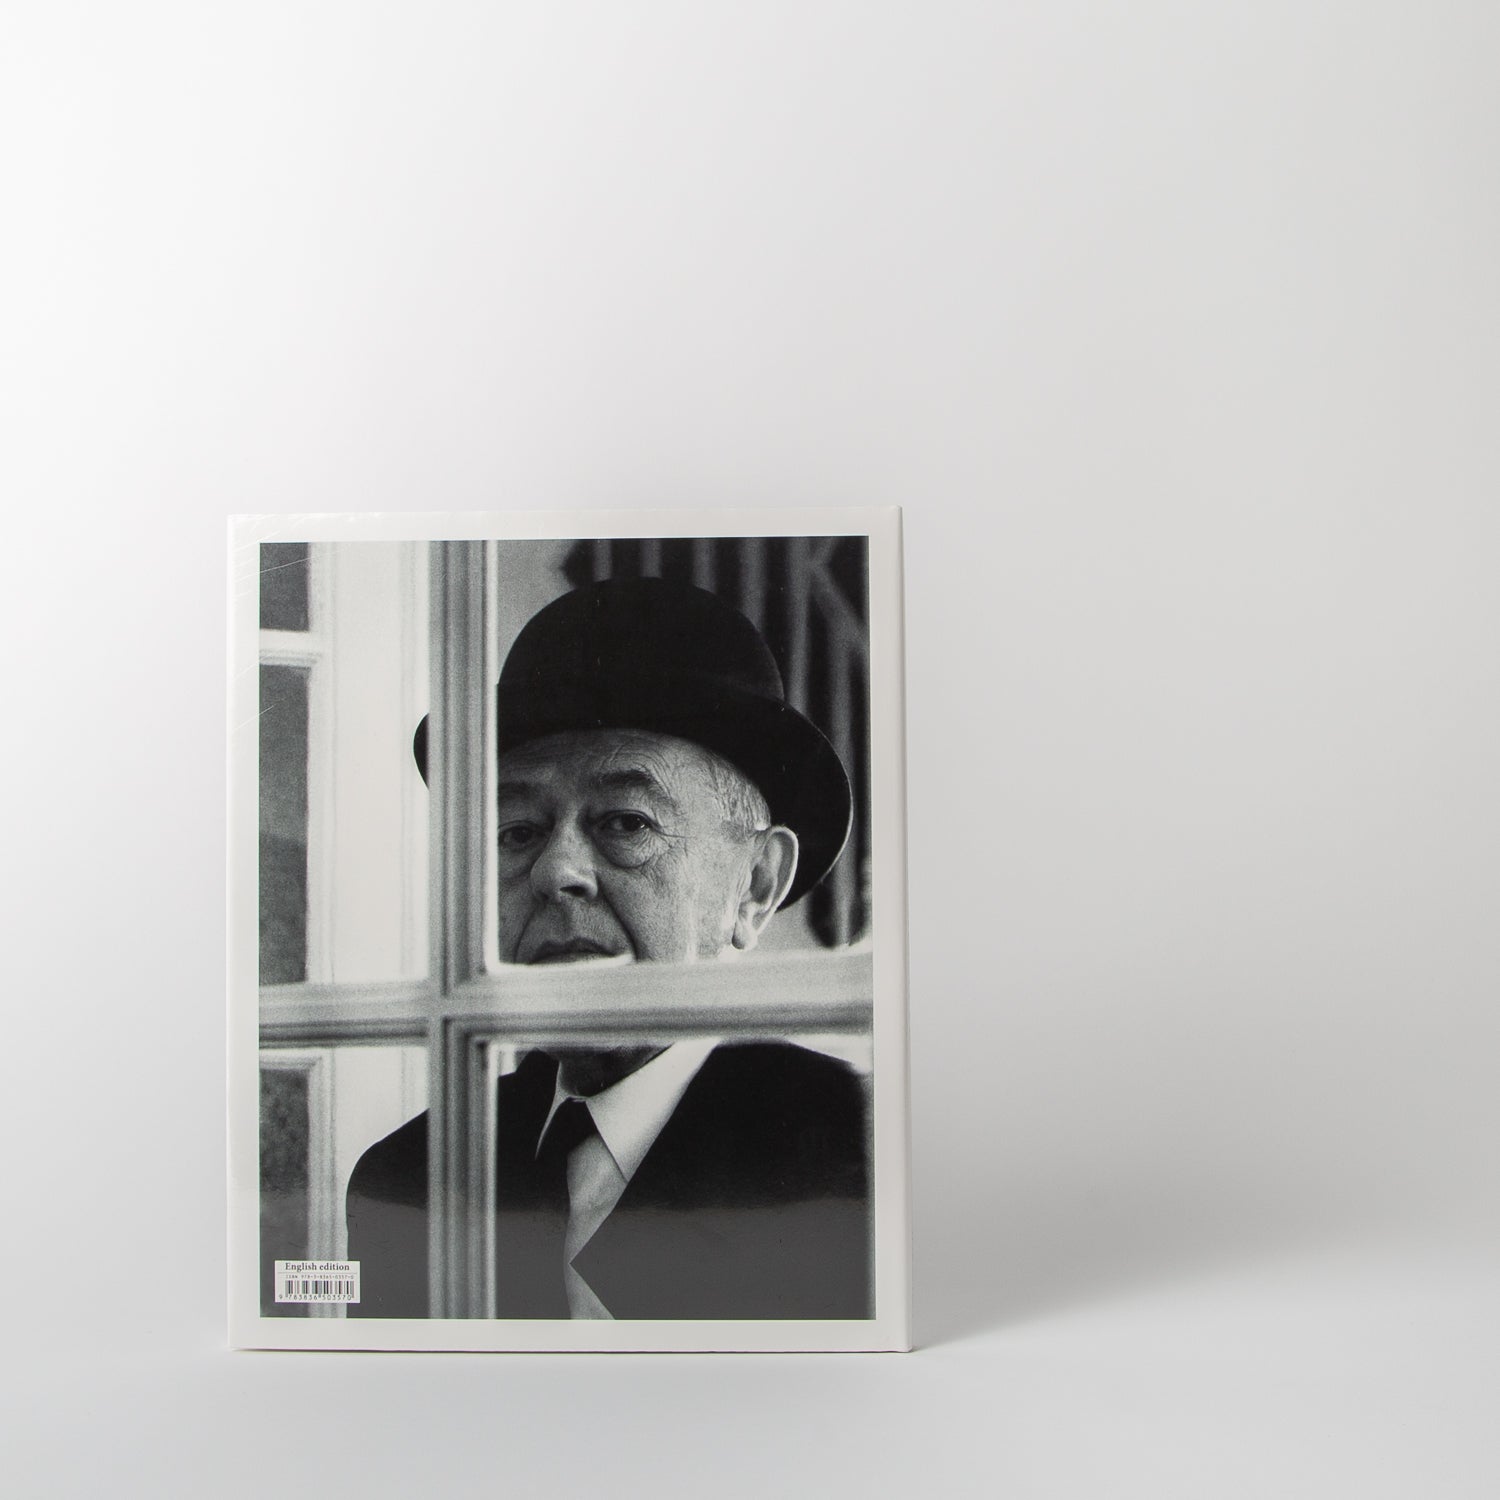 Magritte by Taschen books at Secret Location Concept Store